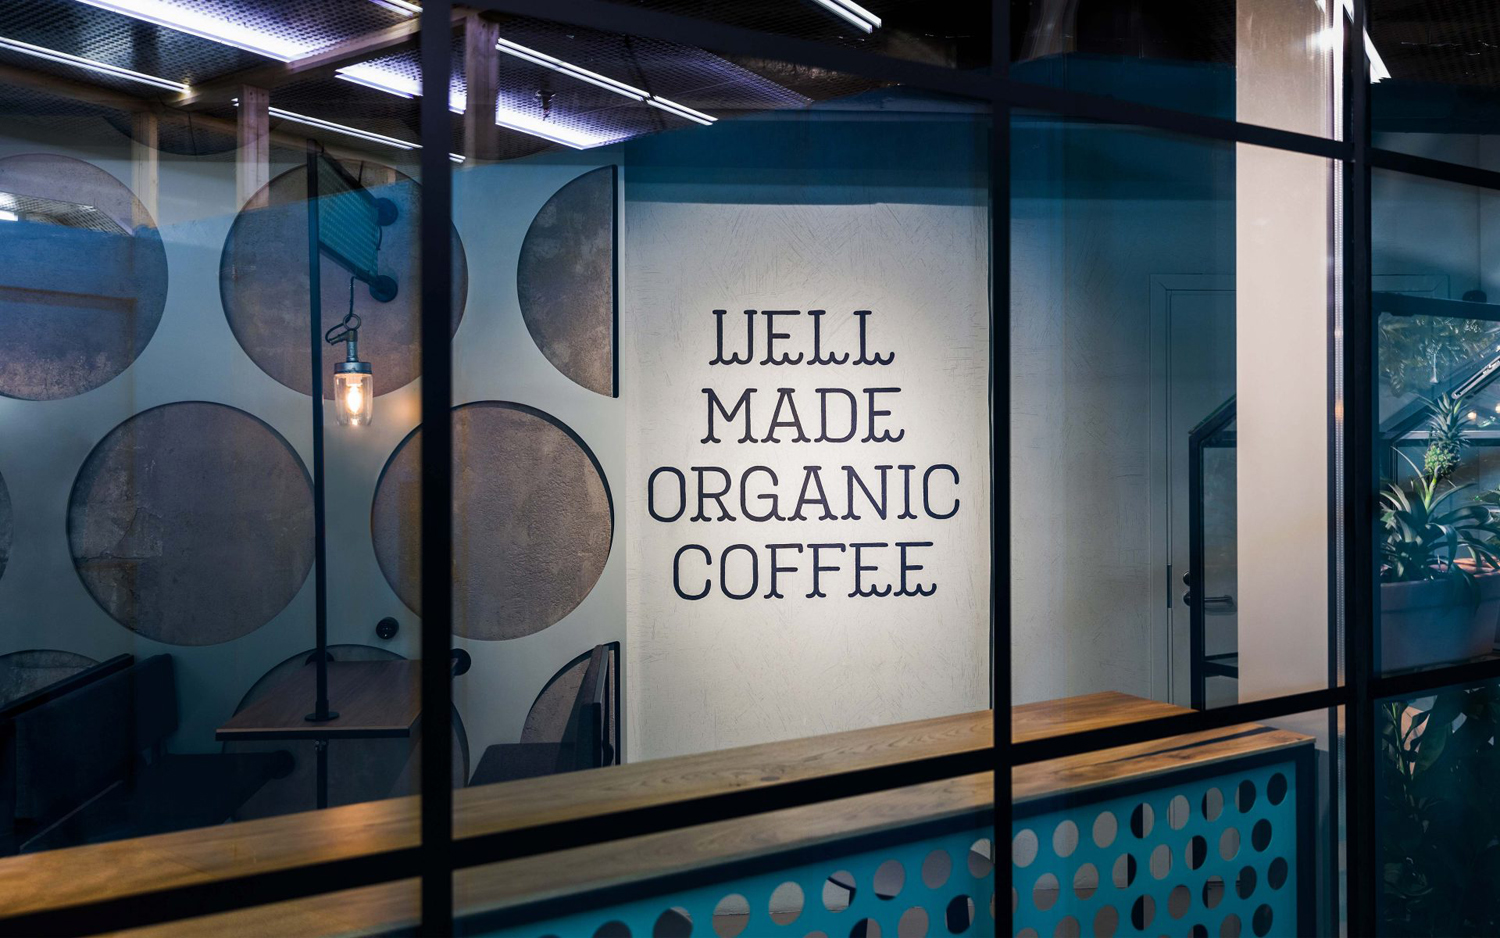 Brand identity and custom typeface by Bond for Helsinki-based vegetarian café Well Coffee